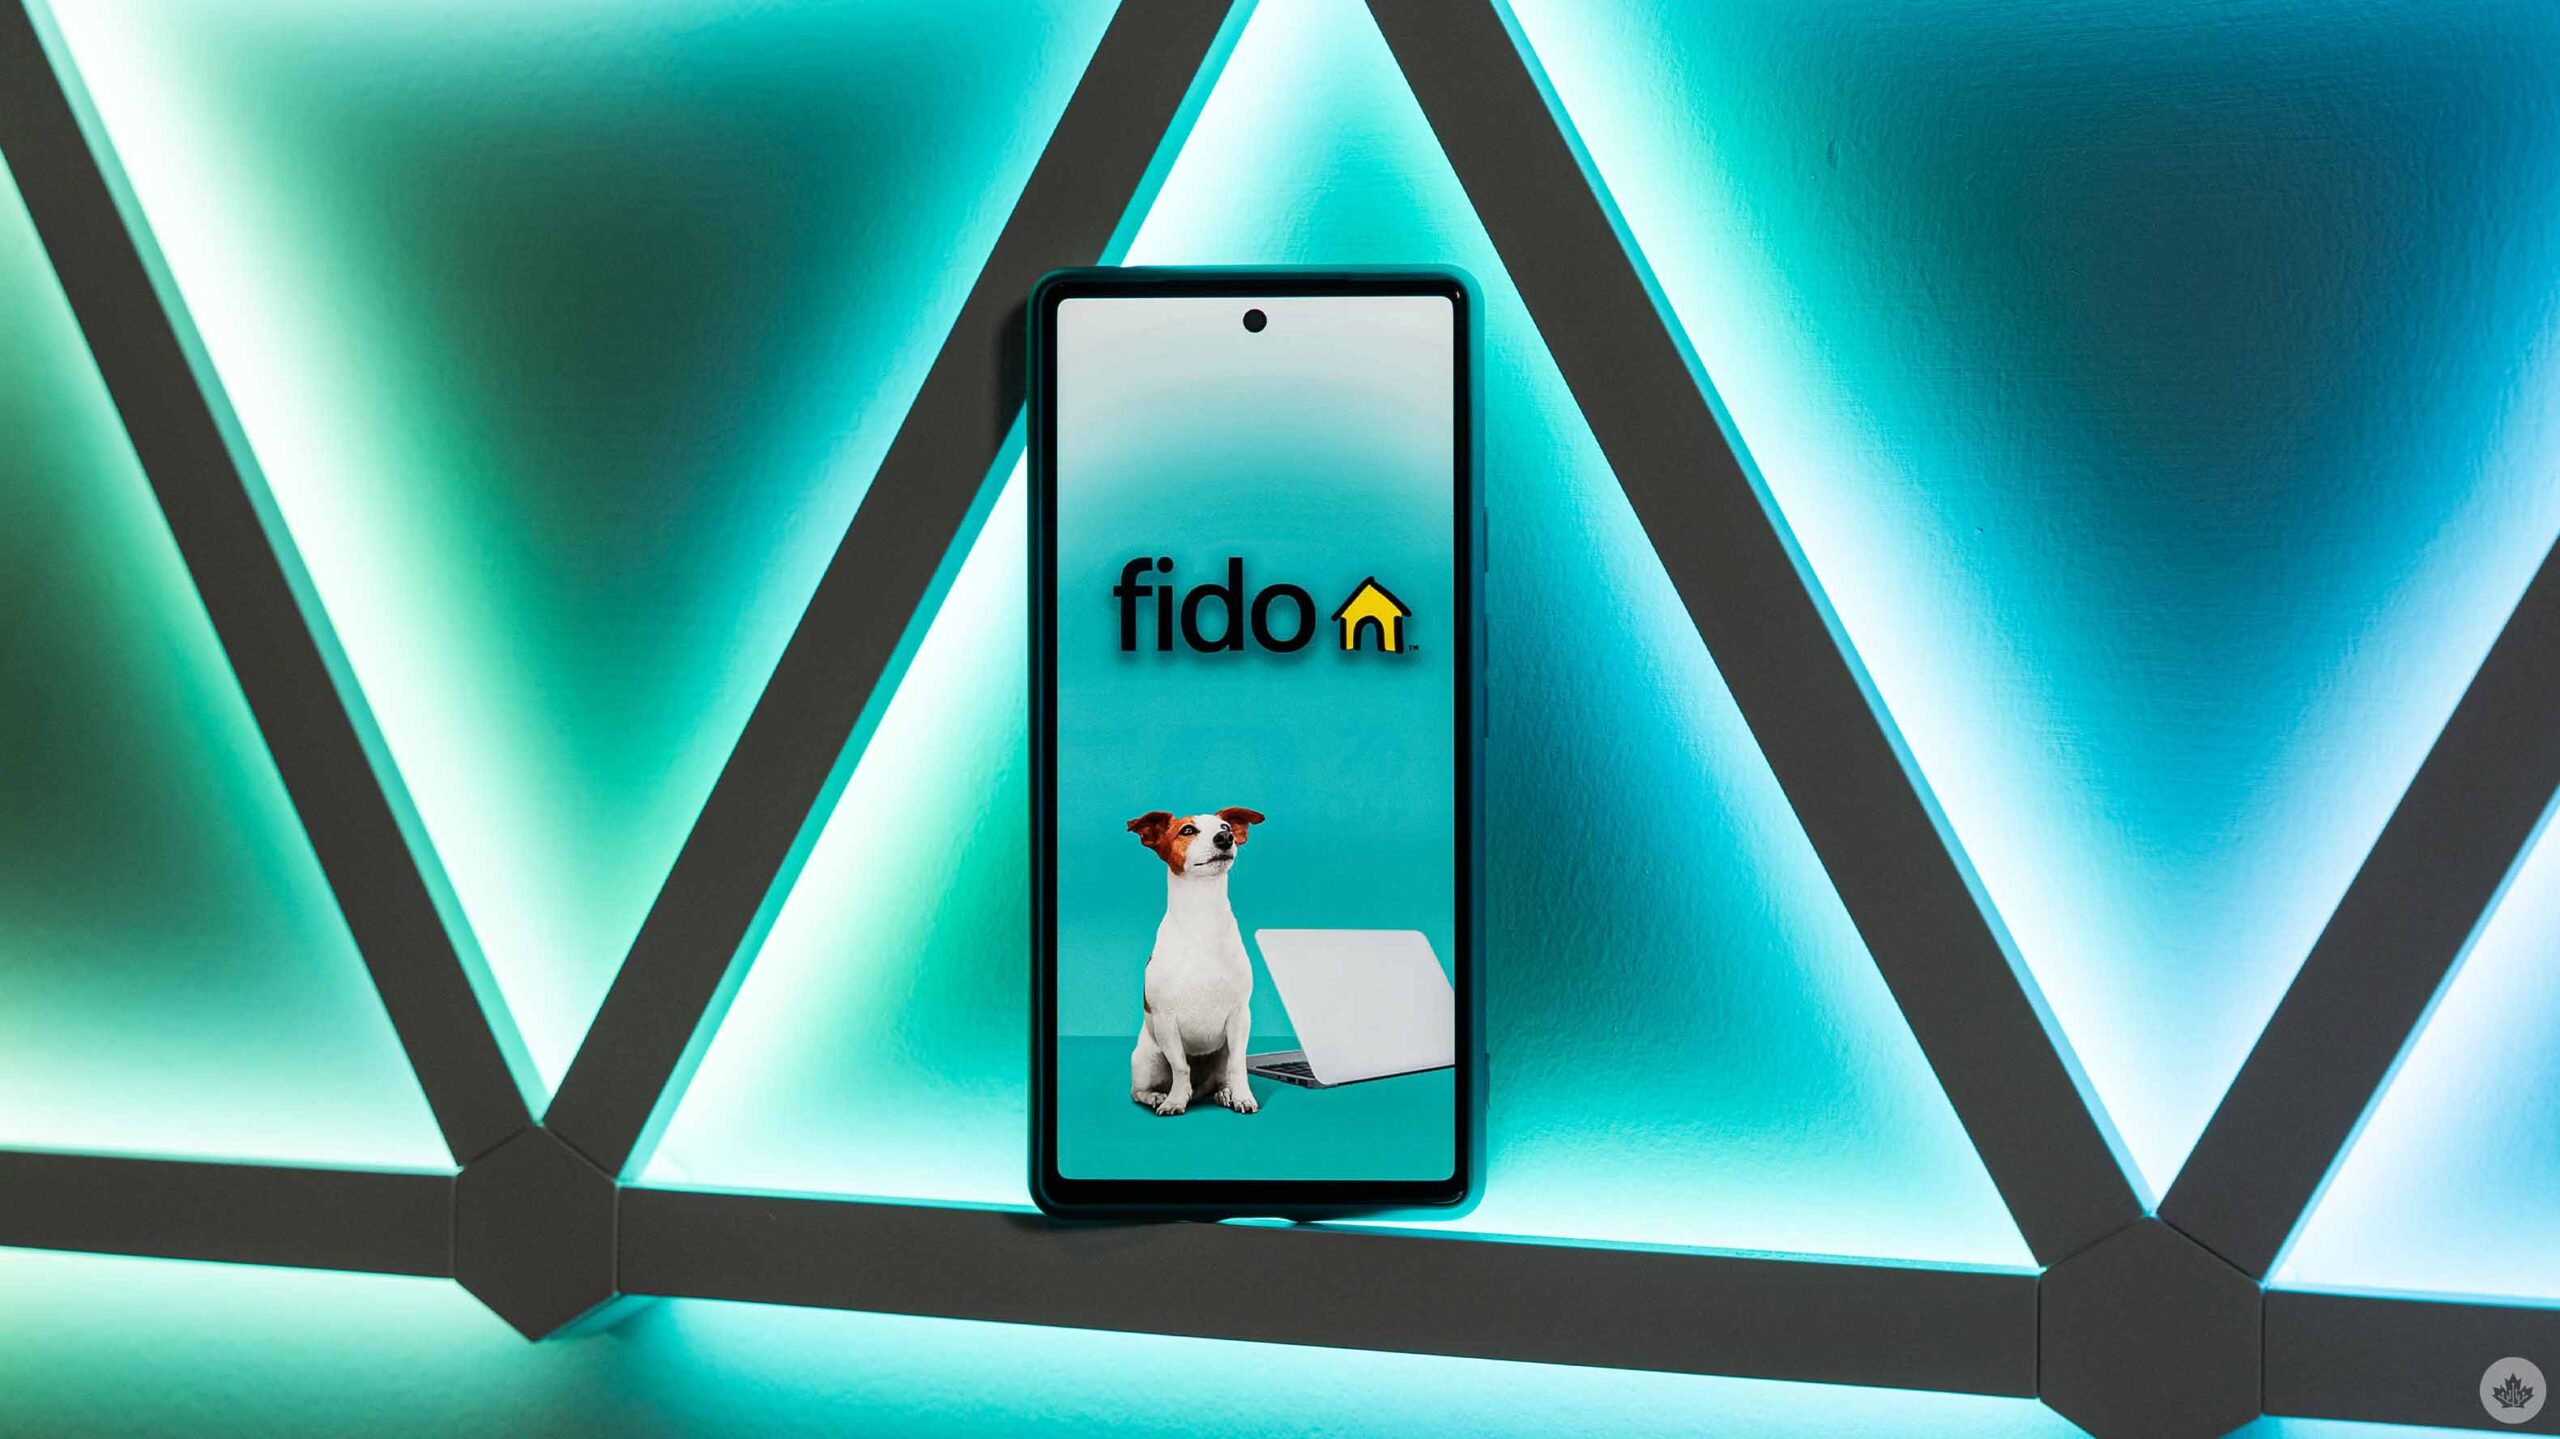 Fido Raises the Monthly Cost of 60GB 4G Plan by $4 26